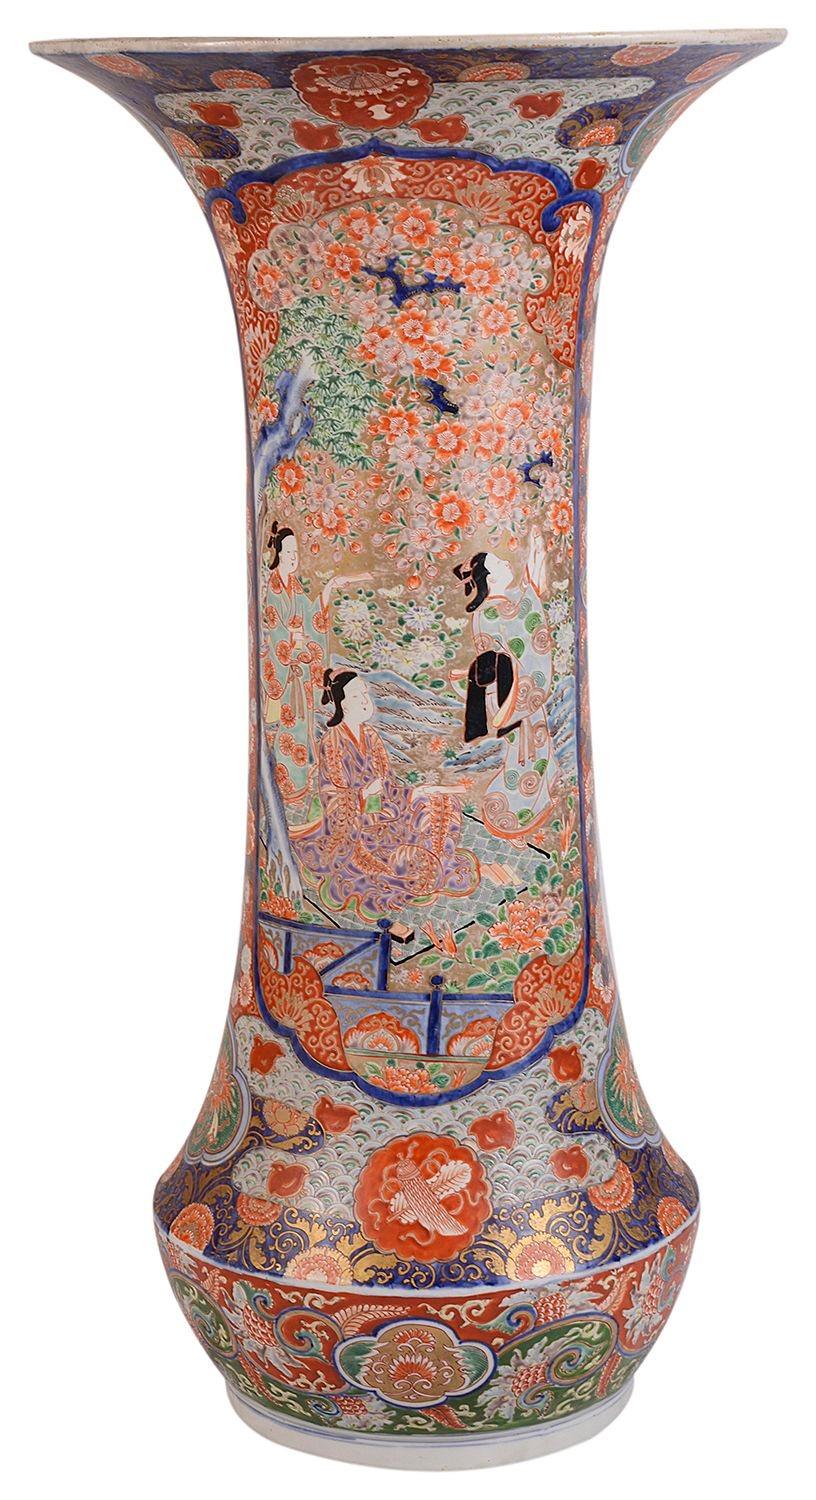 A very impressive fine quality late 19th Century Japanese Imari spill vase, having bold colouring to the motif patterned boarders, inset painted panels depicting Geisha birds among blossom trees.
 
 
Batch 72 